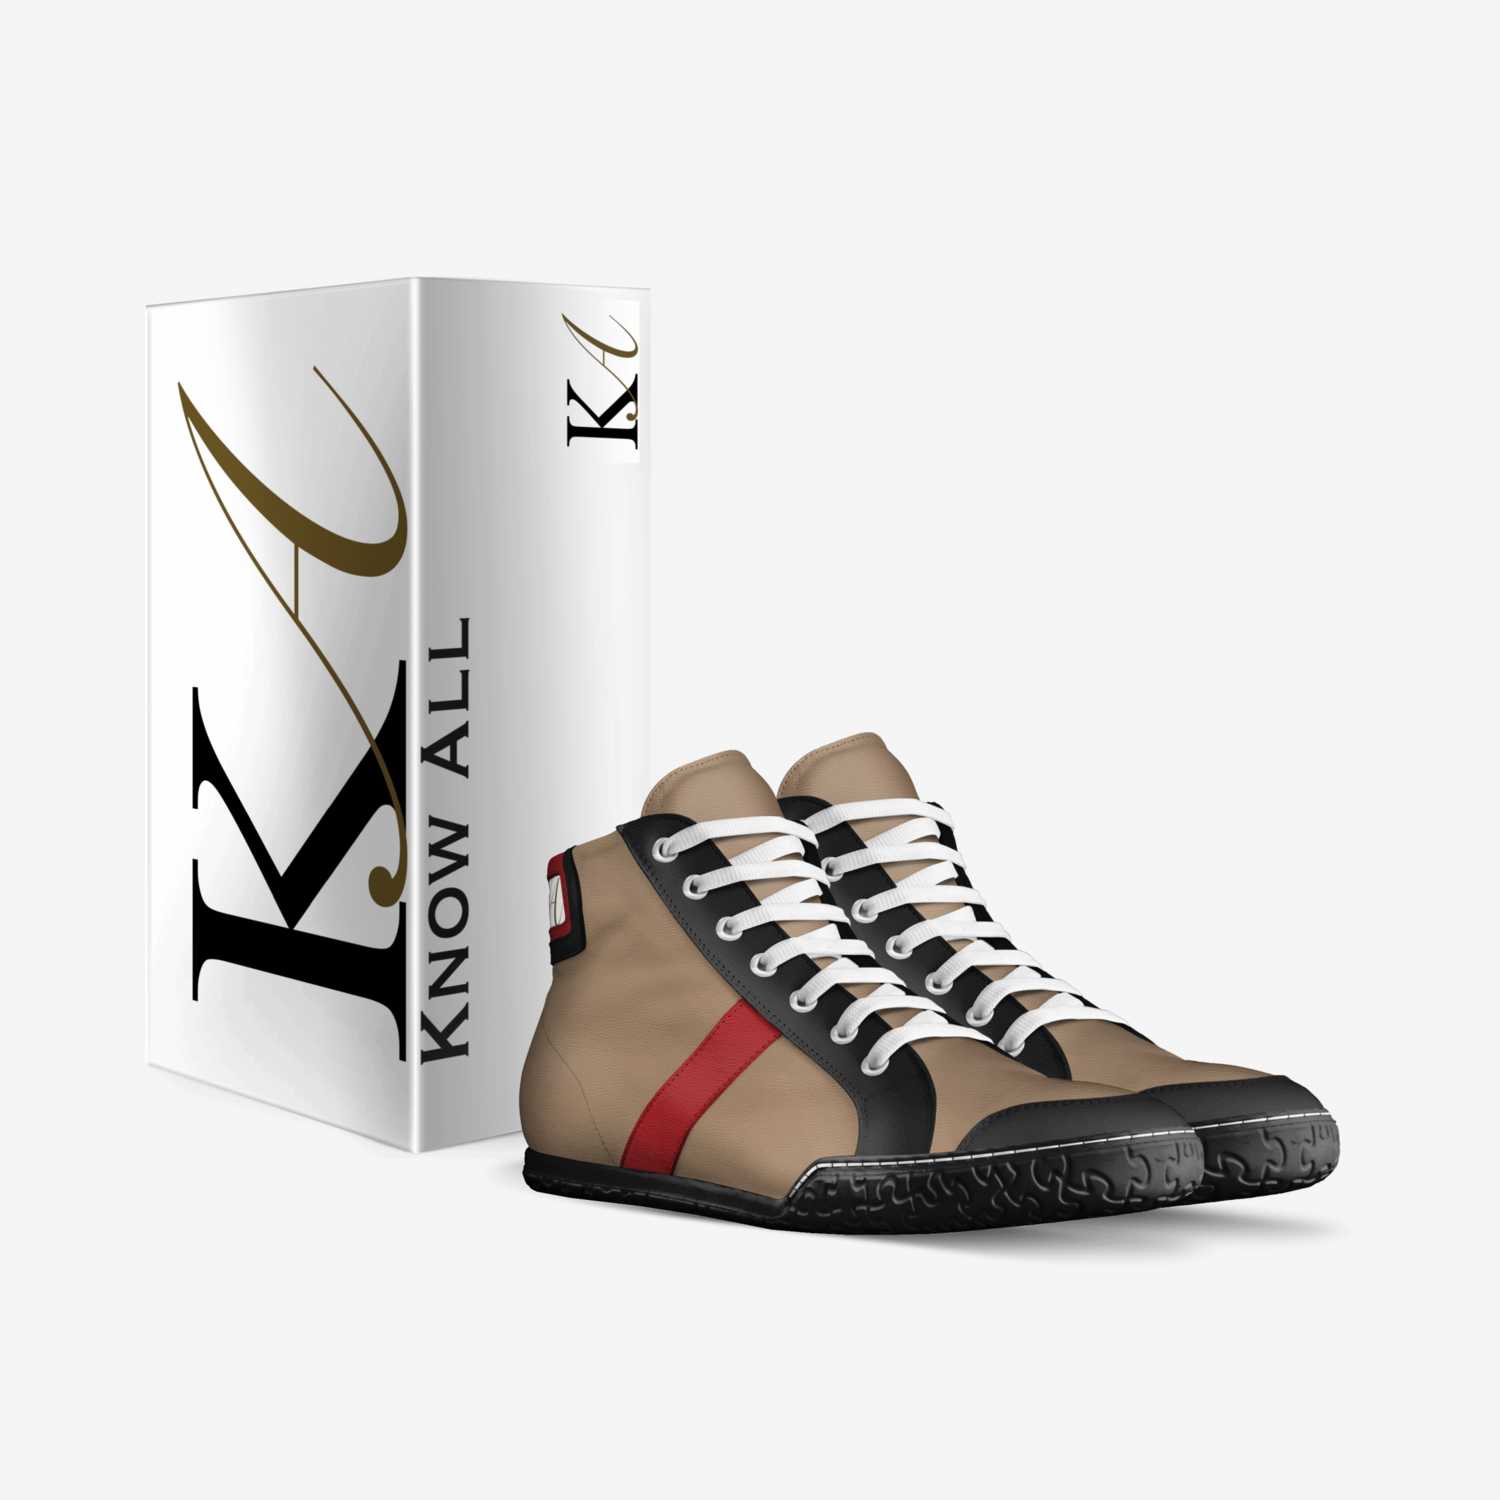 Know All custom made in Italy shoes by Kenya Anais | Box view